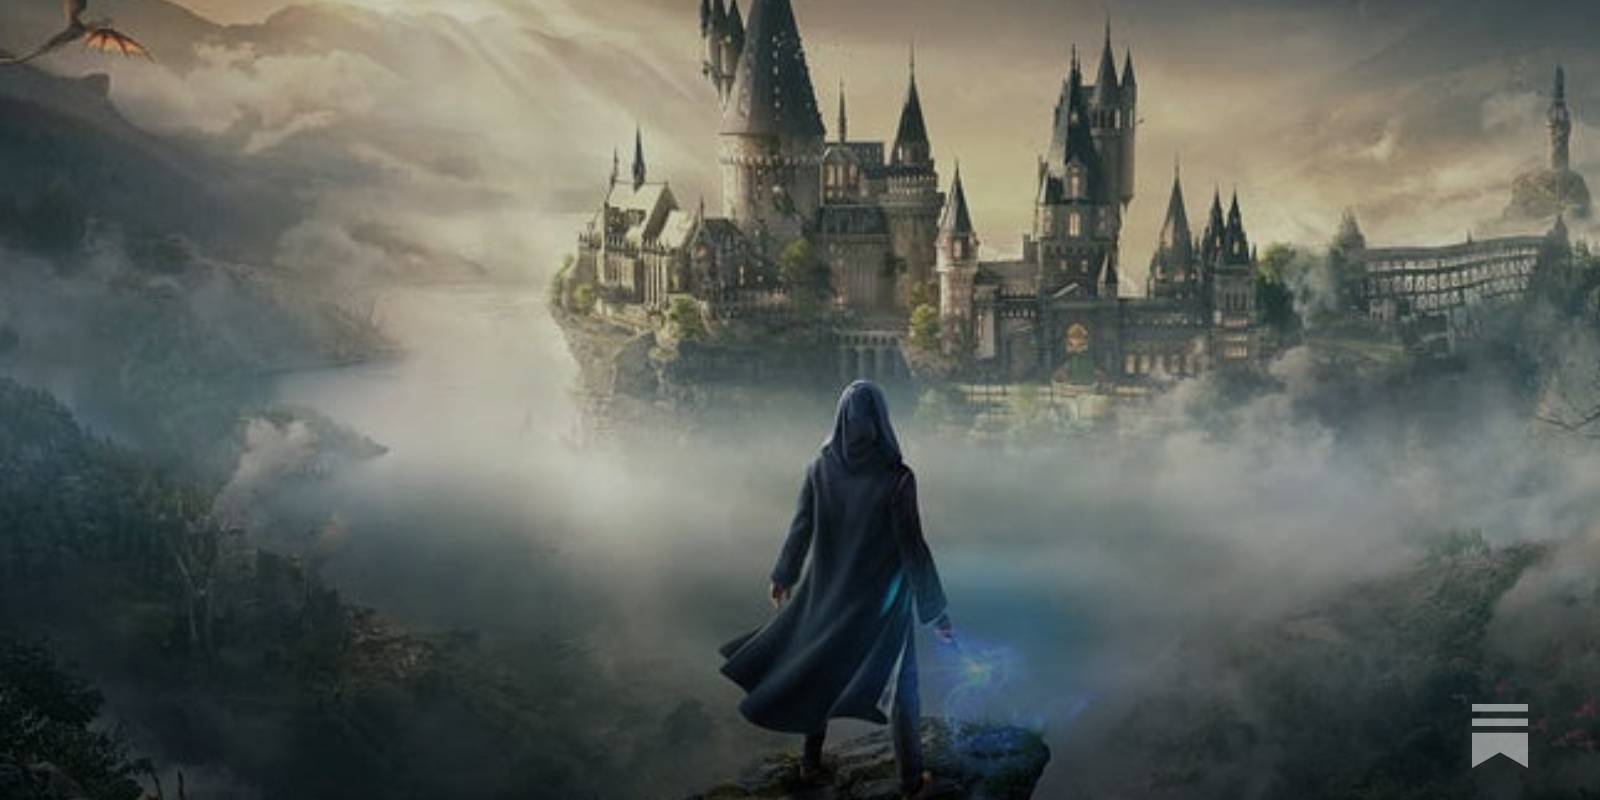 Hogwarts Legacy dominates Steam's top four bestsellers - TechStory